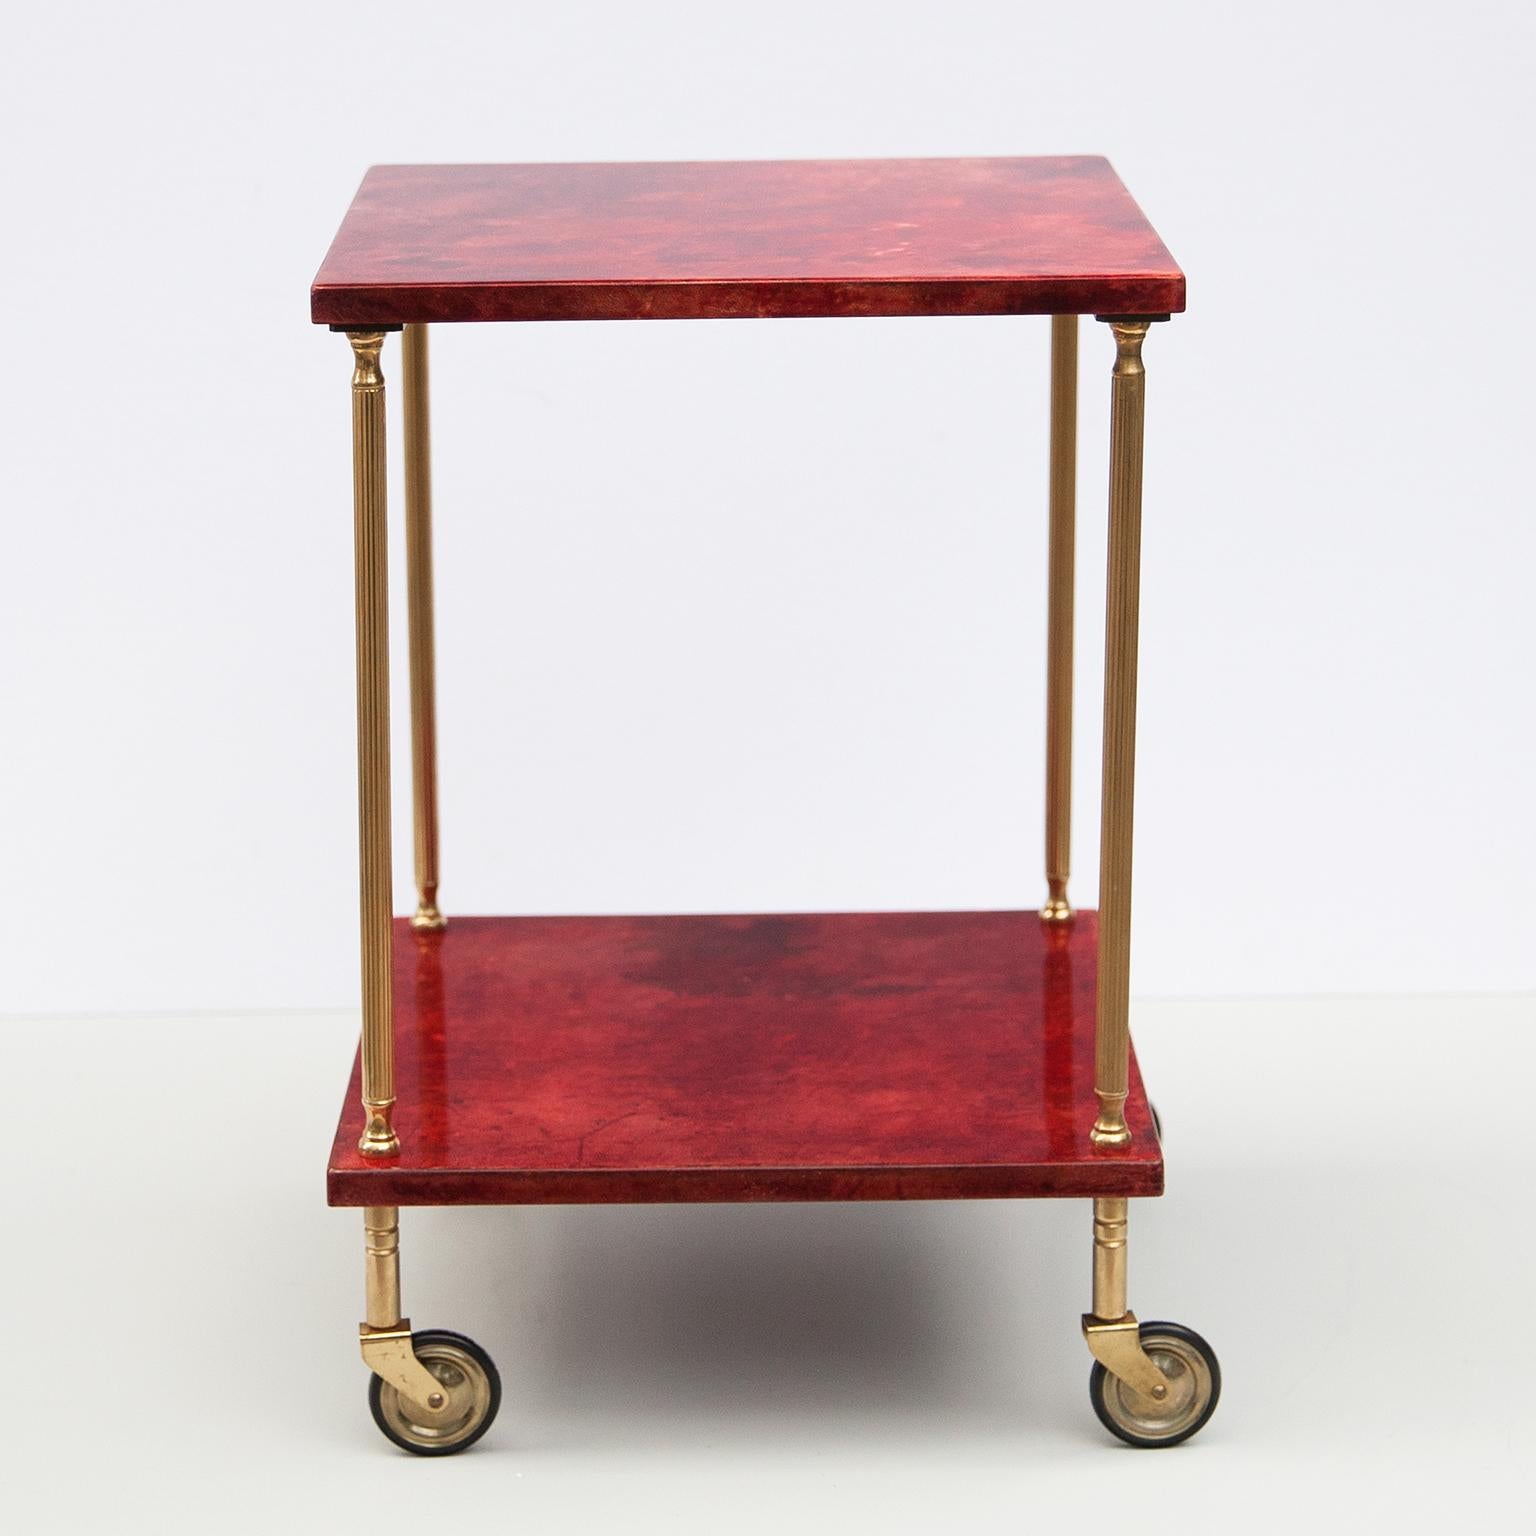 Wonderful bar cart of Aldo Tura in lacquered goatskin with brass rods and is in very good vintage condition.
This serving cart was executed, circa 1960 in a red parchment. Along with artists like Piero Fornasetti and Carlo Bugatti, Aldo Tura